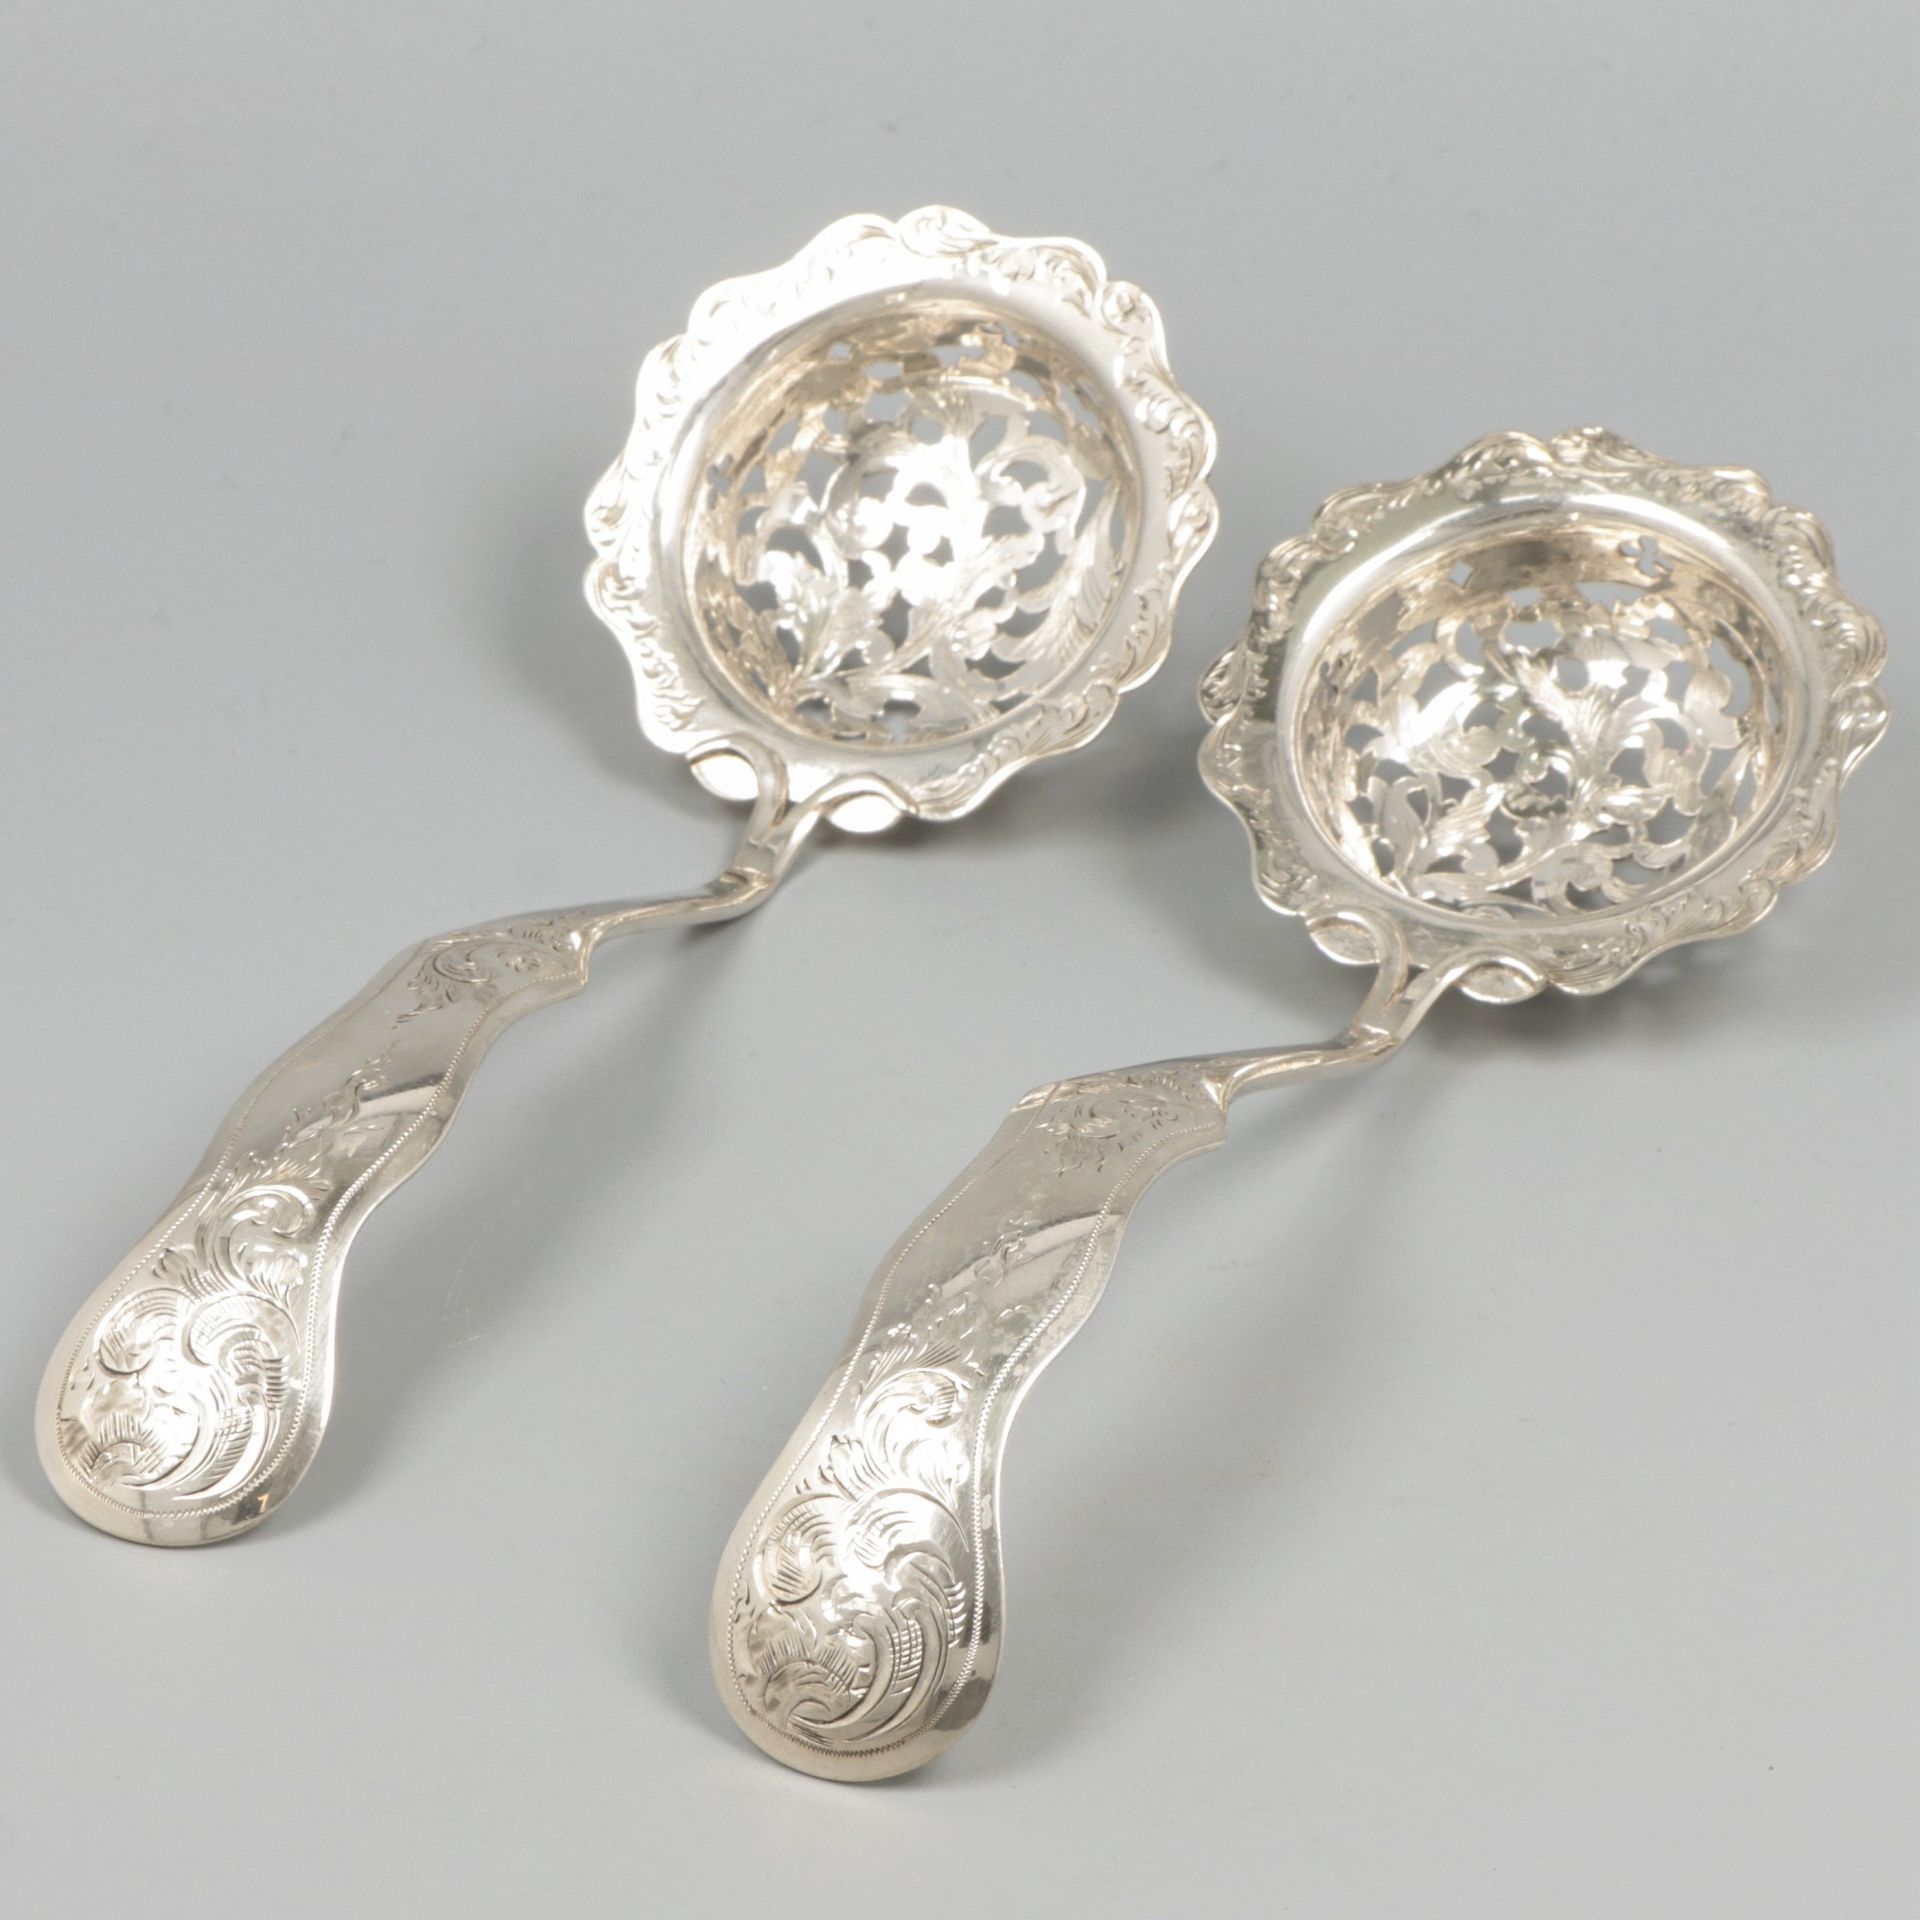 2-piece set of silver sifter spoons. Beautiful set with engraved rocailles and p&hellip;